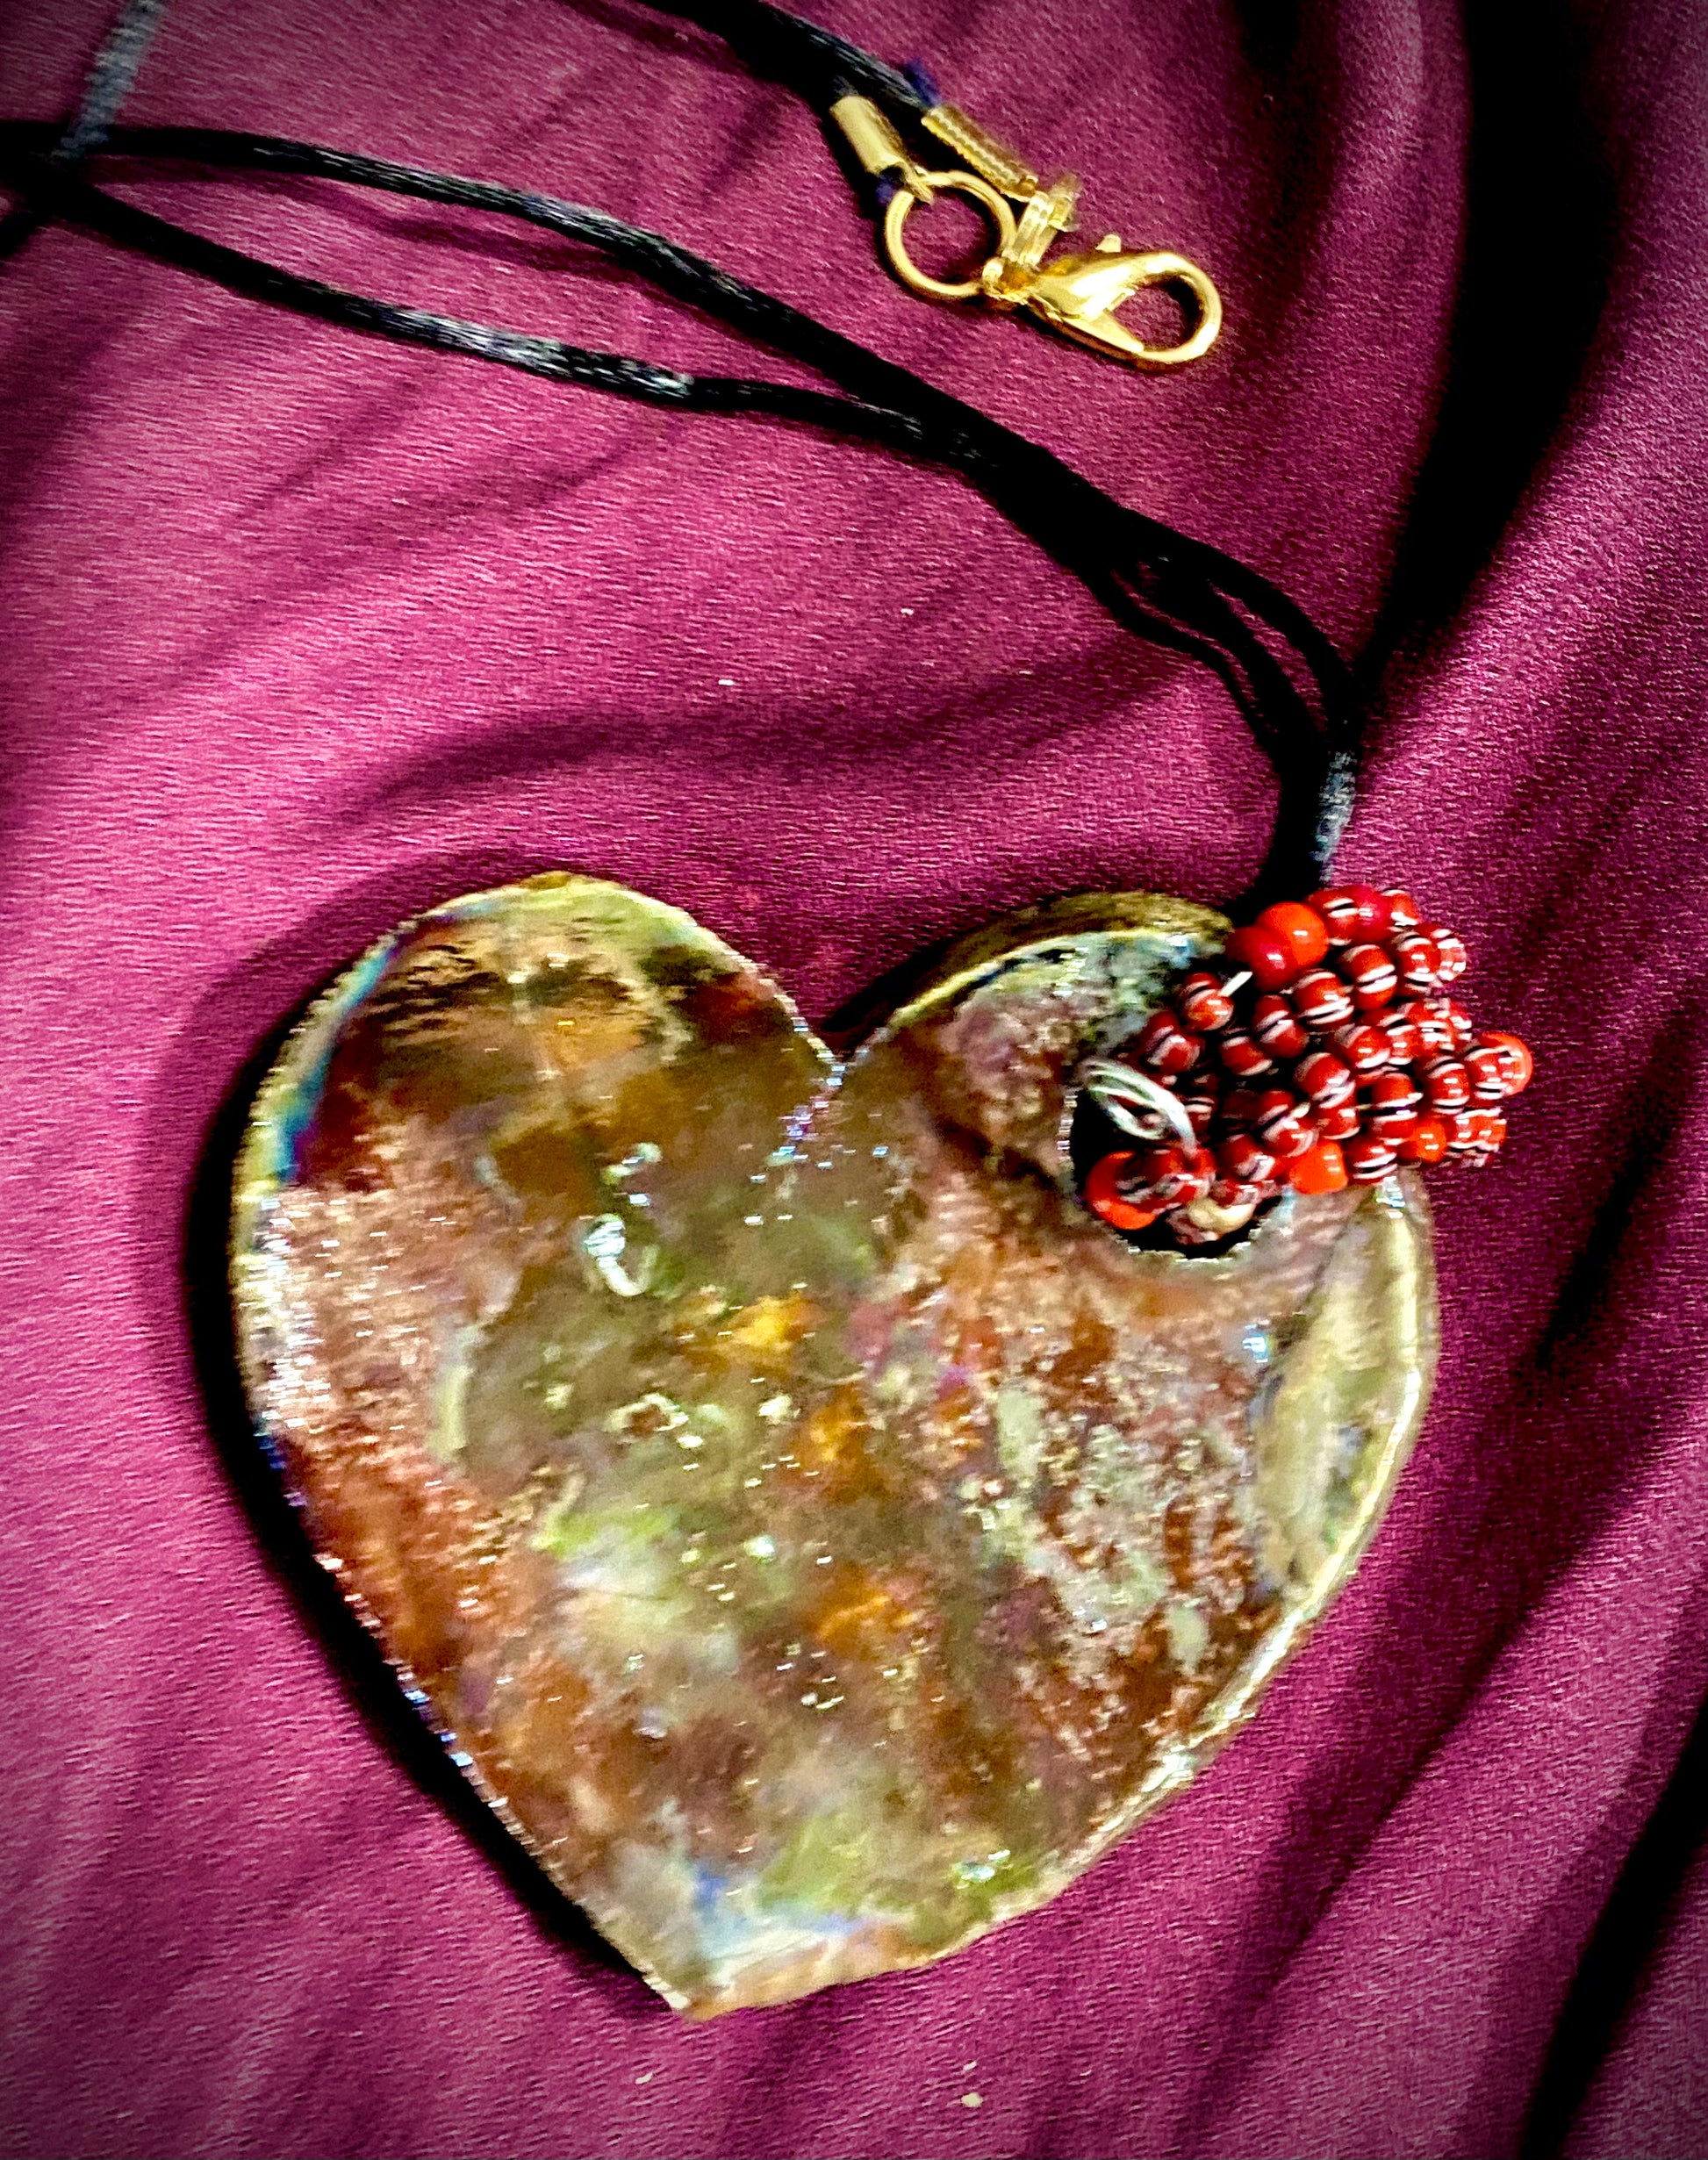  Have A Heart ! Each heart pendant is handmade with love! It is 3"x 3" and weighs approx. 3ozs. This pendant has a colorful copper metallic raku glazes that renders a unique translucent patina. The heart has a textured pattern . Both sides are  are different and equally beautiful! It holds a spiral of blue mini beads on a spiral copper wire. This pendant has a nice 12" black rattail  cord!